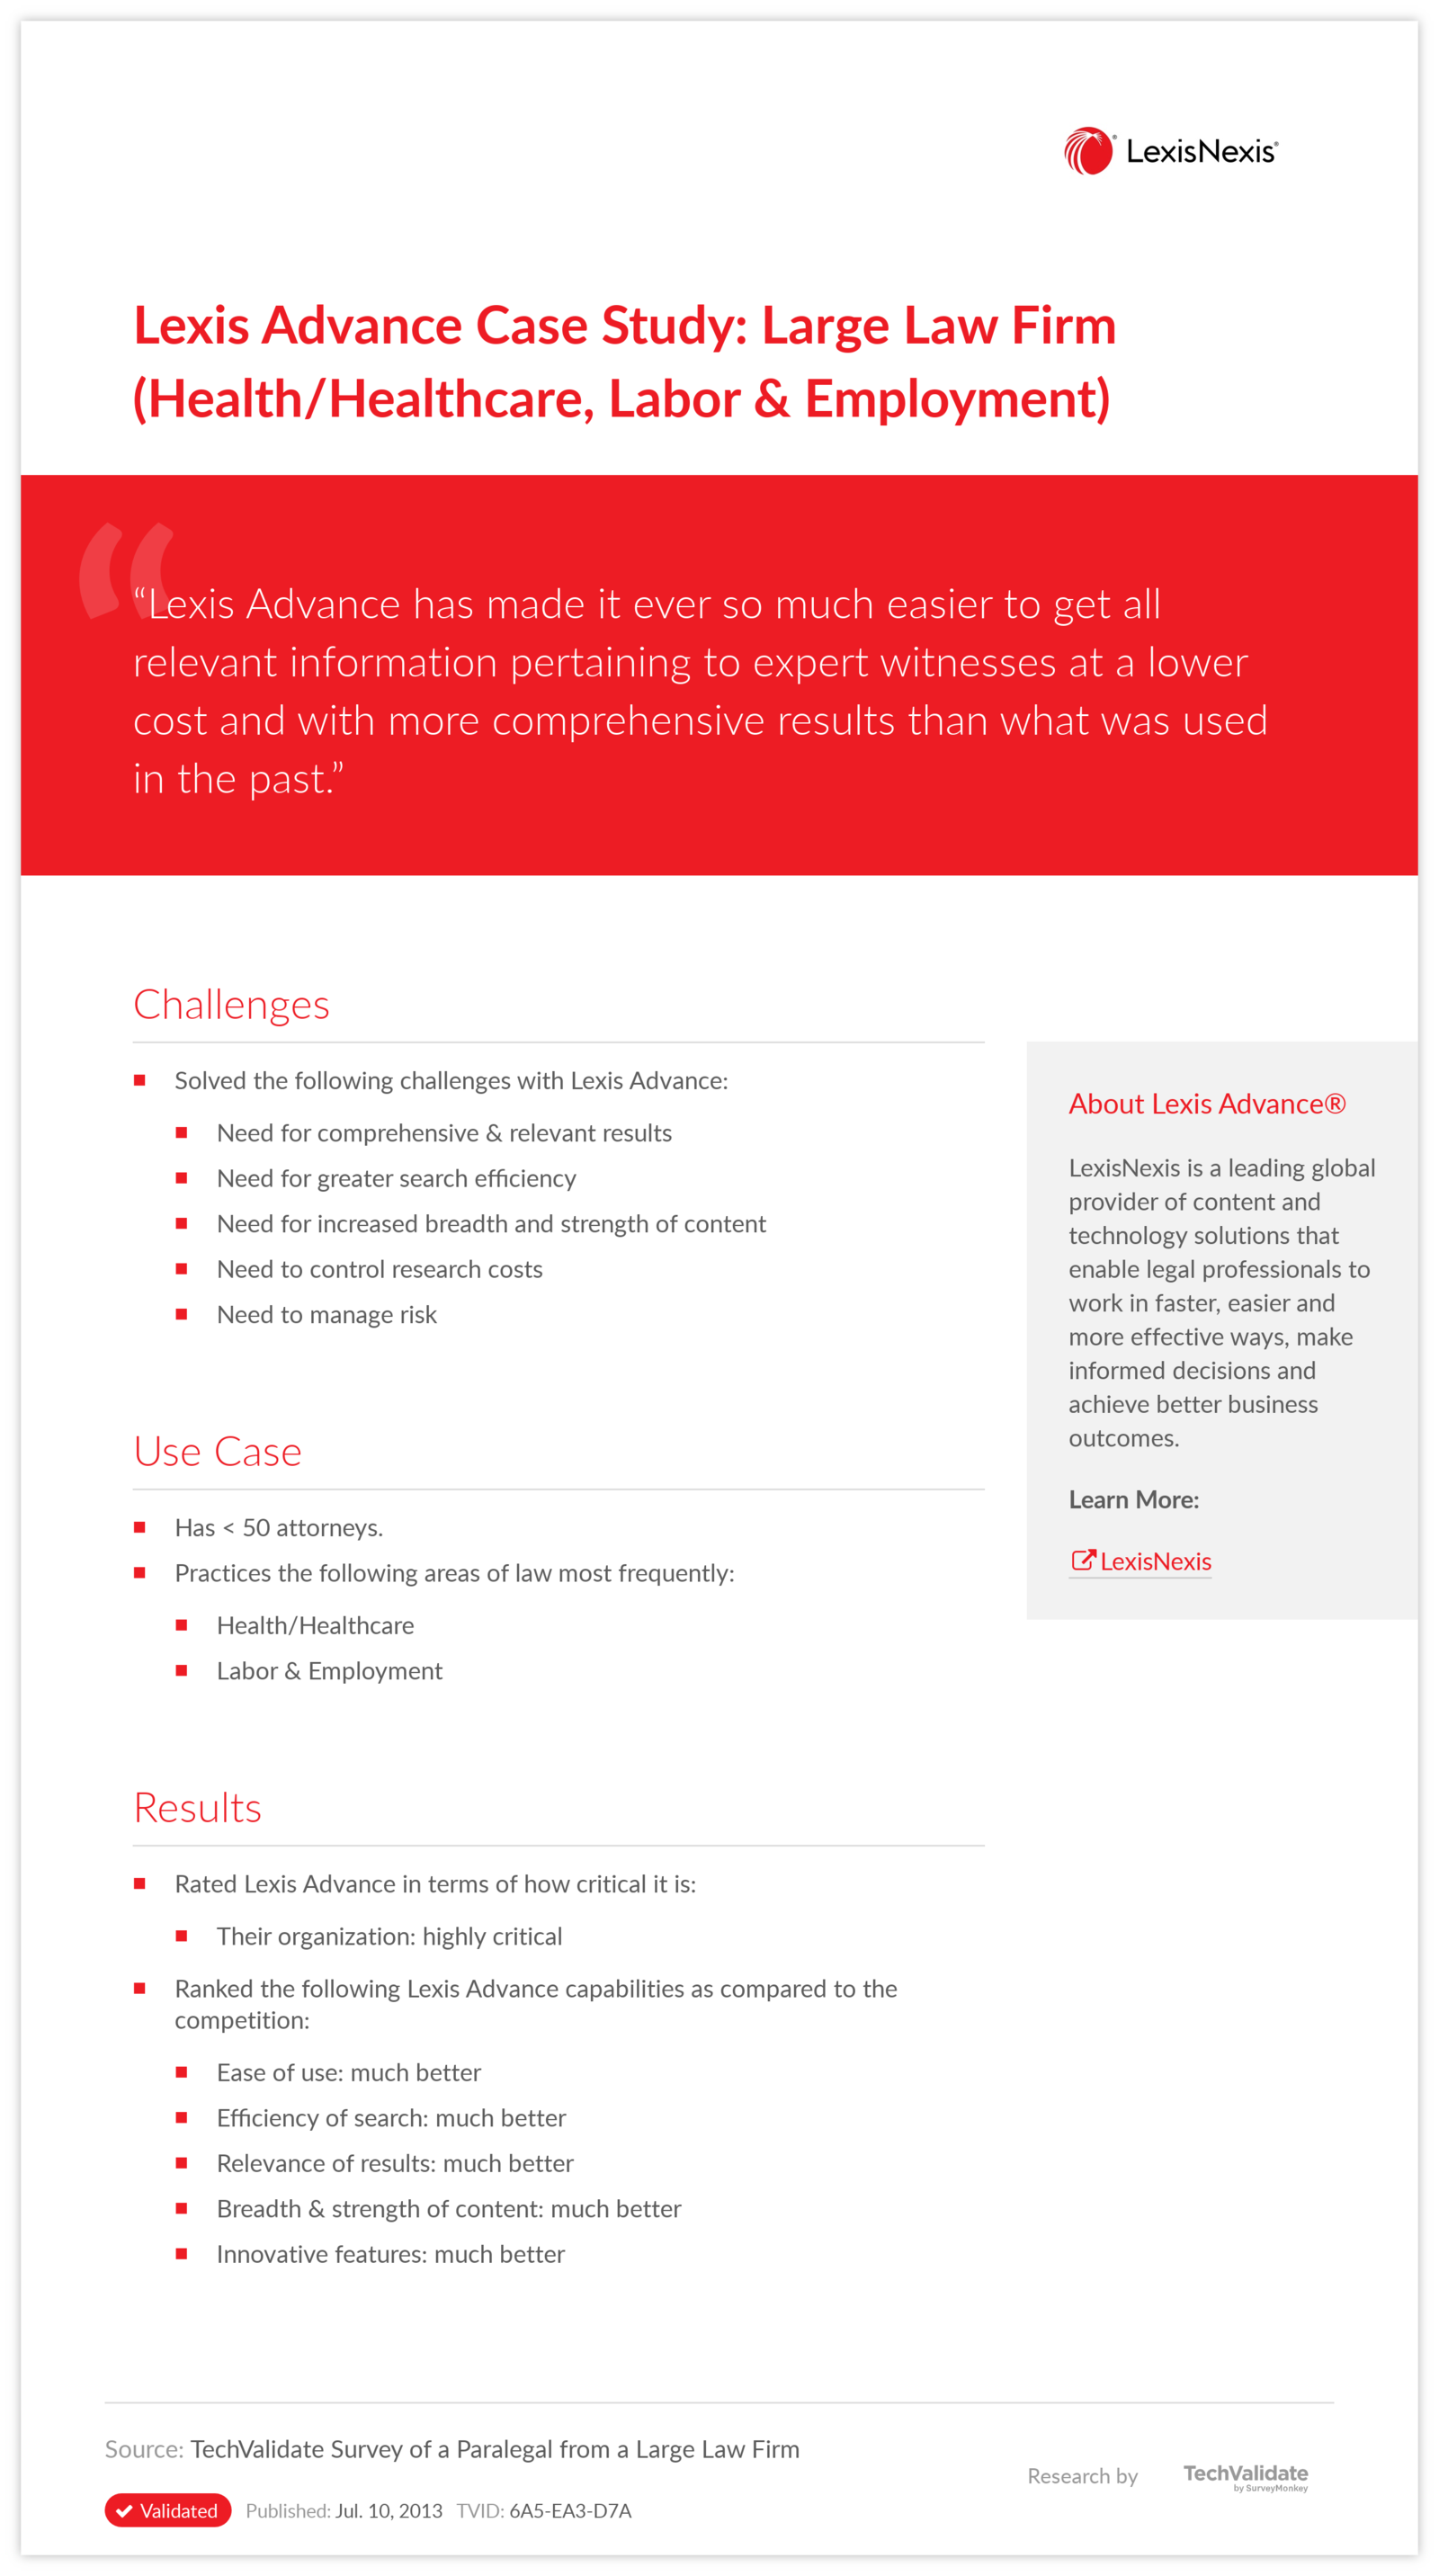 Lexis Advance Case Study: Large Law Firm (Health/Healthcare, Labor & Employment)